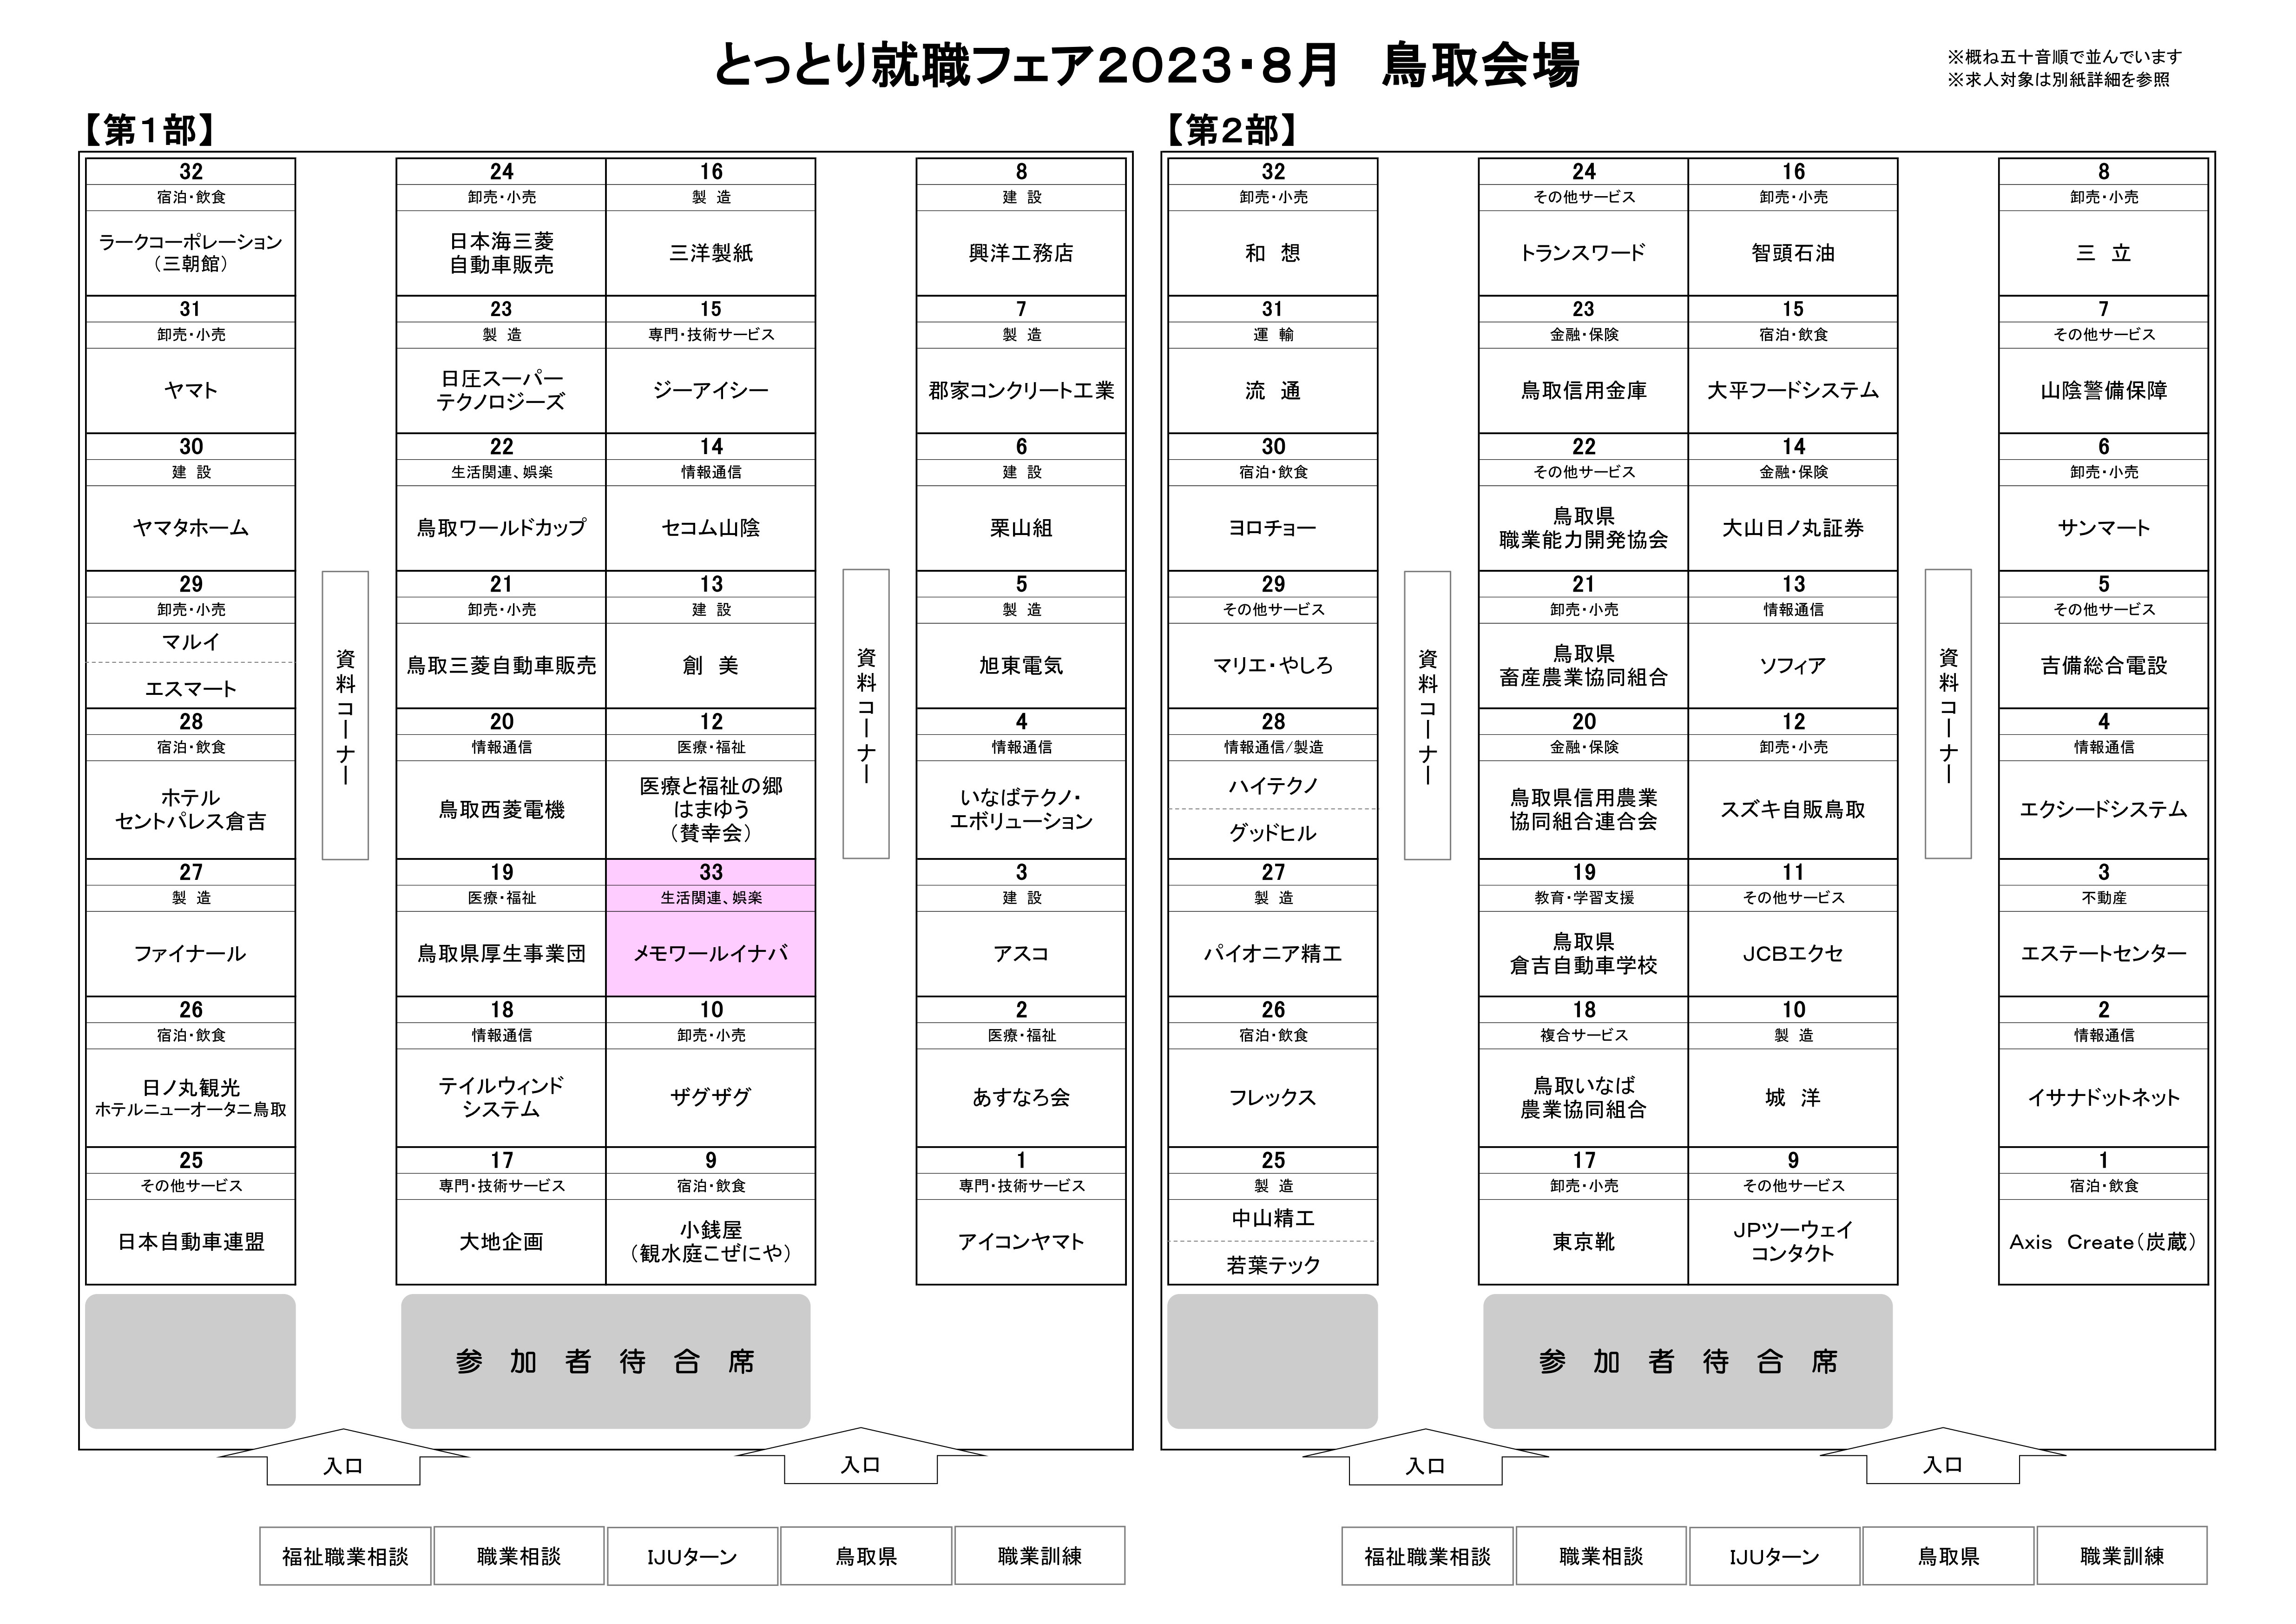 layout_tottori_8.9_01.png